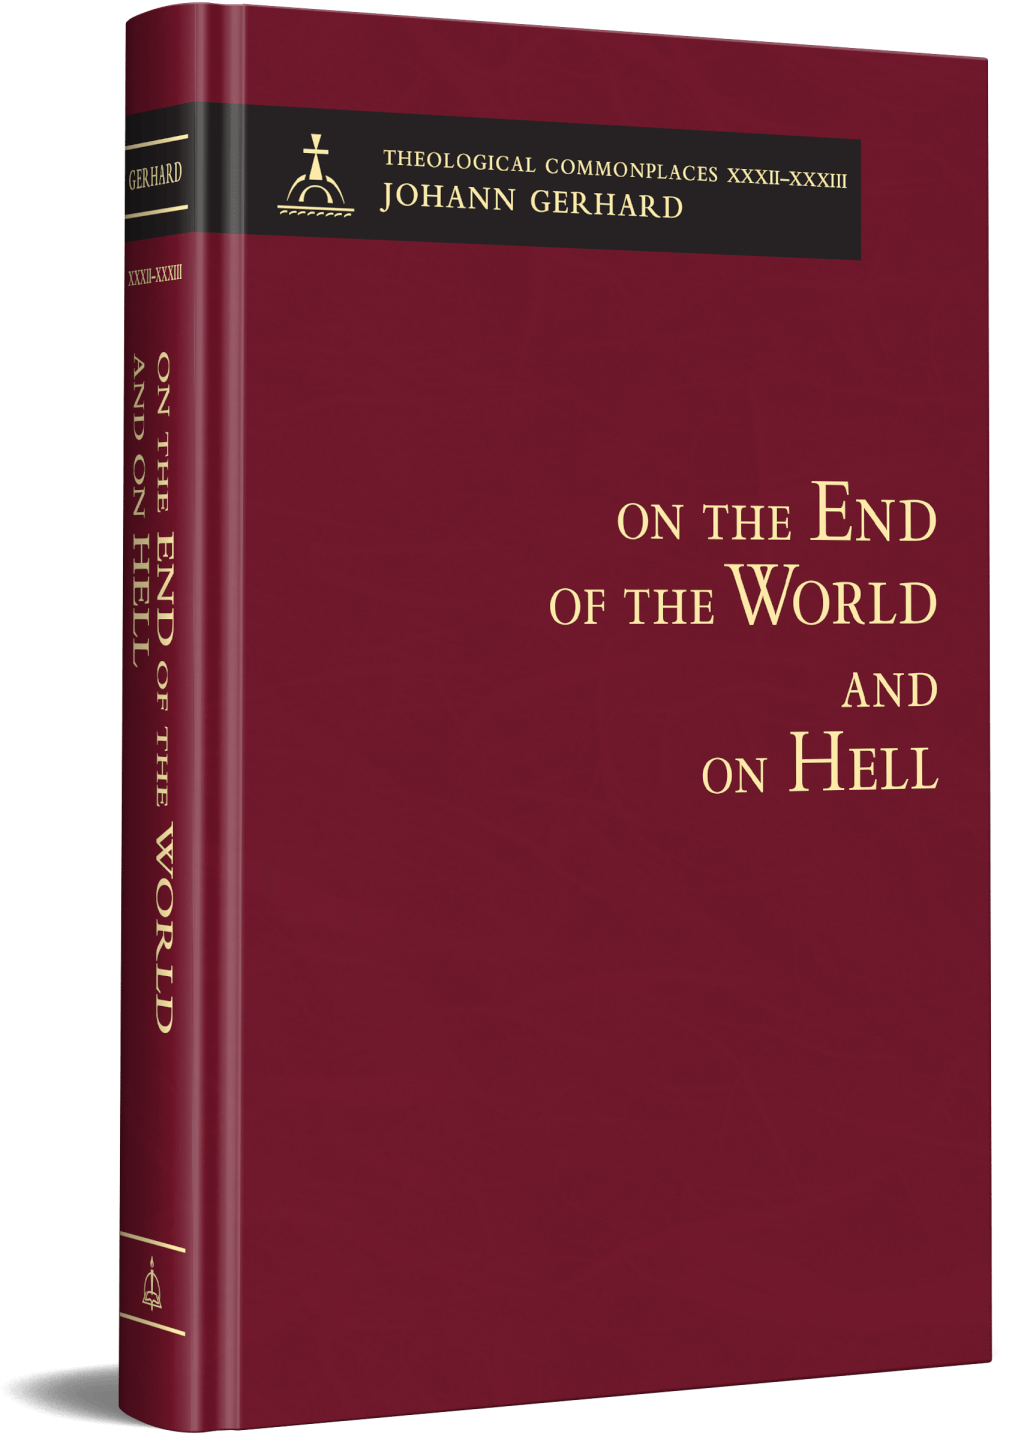 On the End of the World and On Hell: Theological Commonplaces